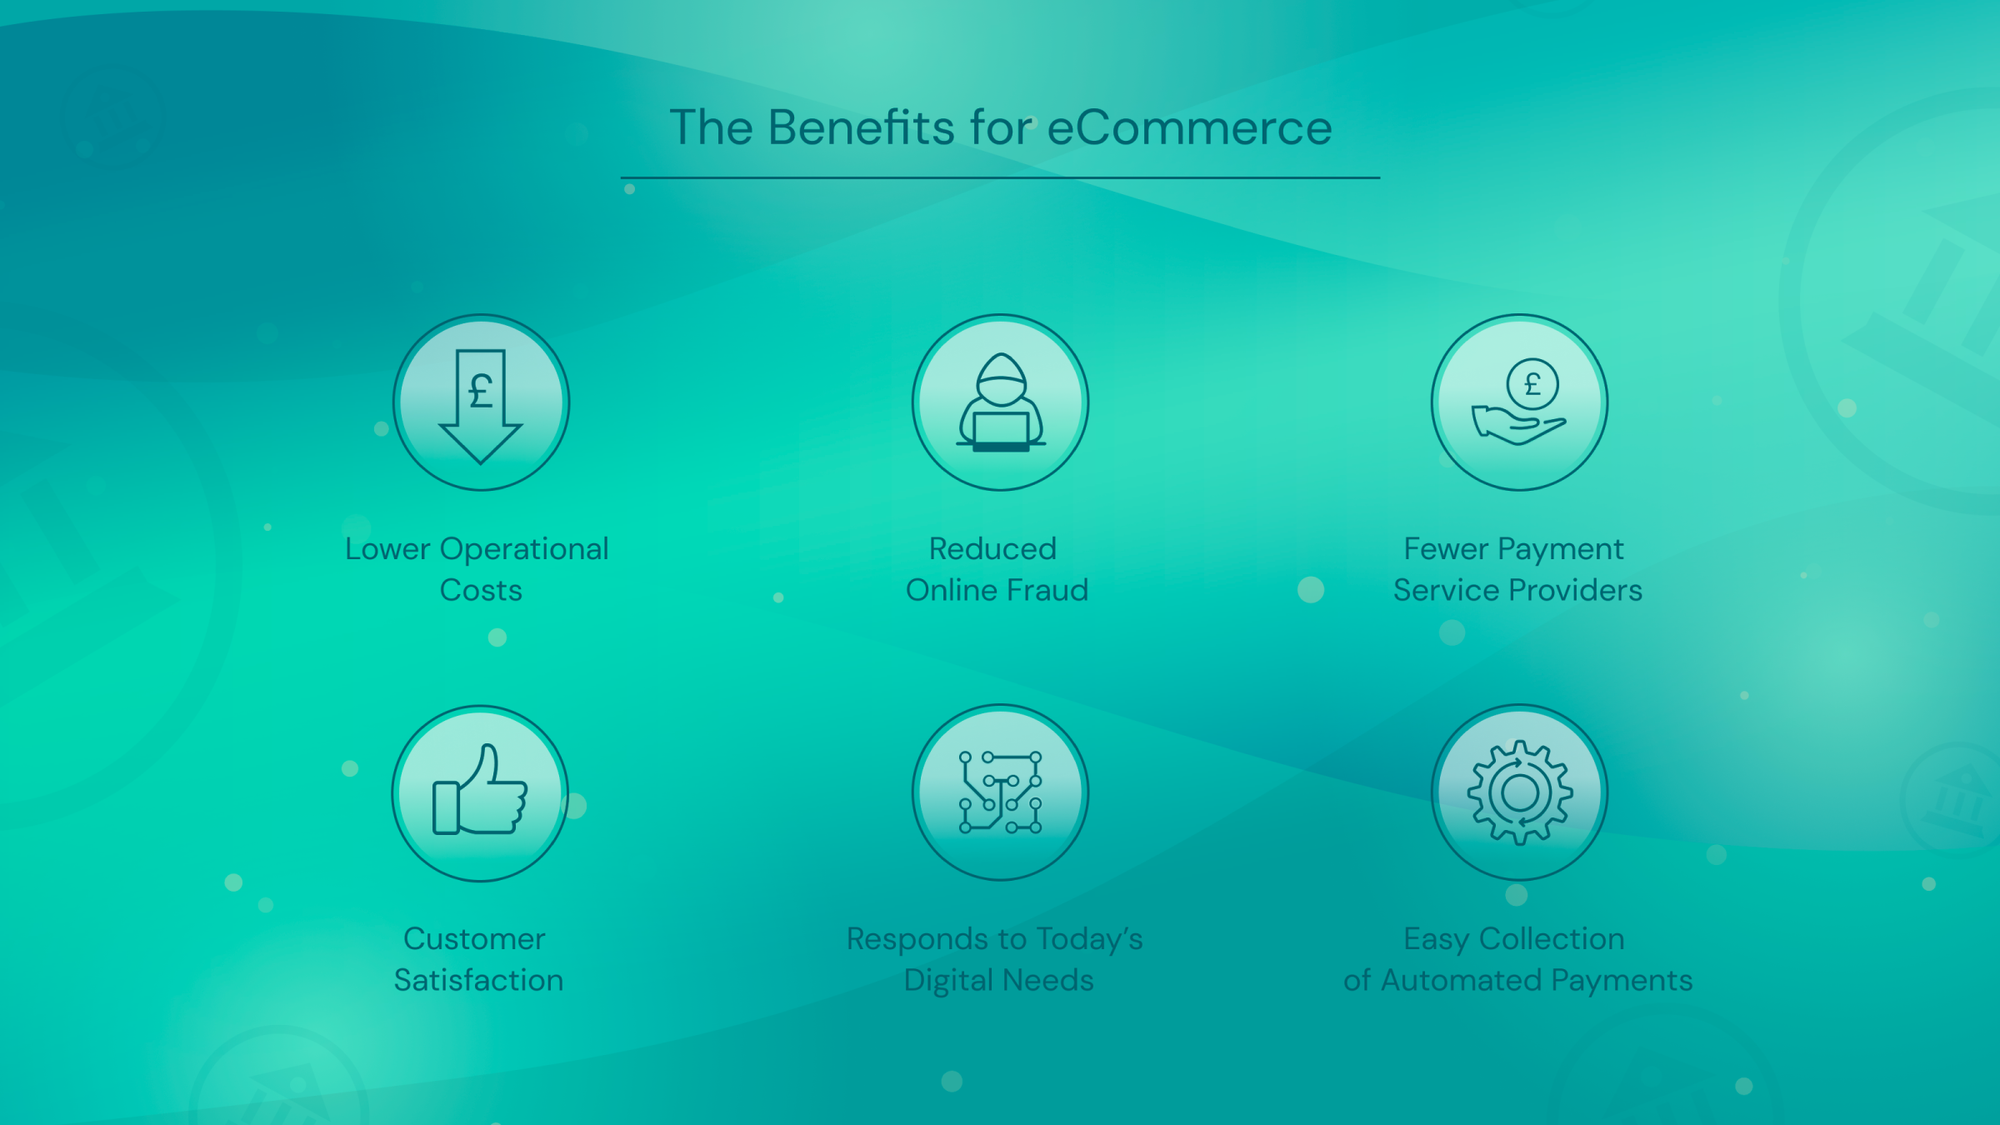 Rvvup - The Benefits for eCommerce